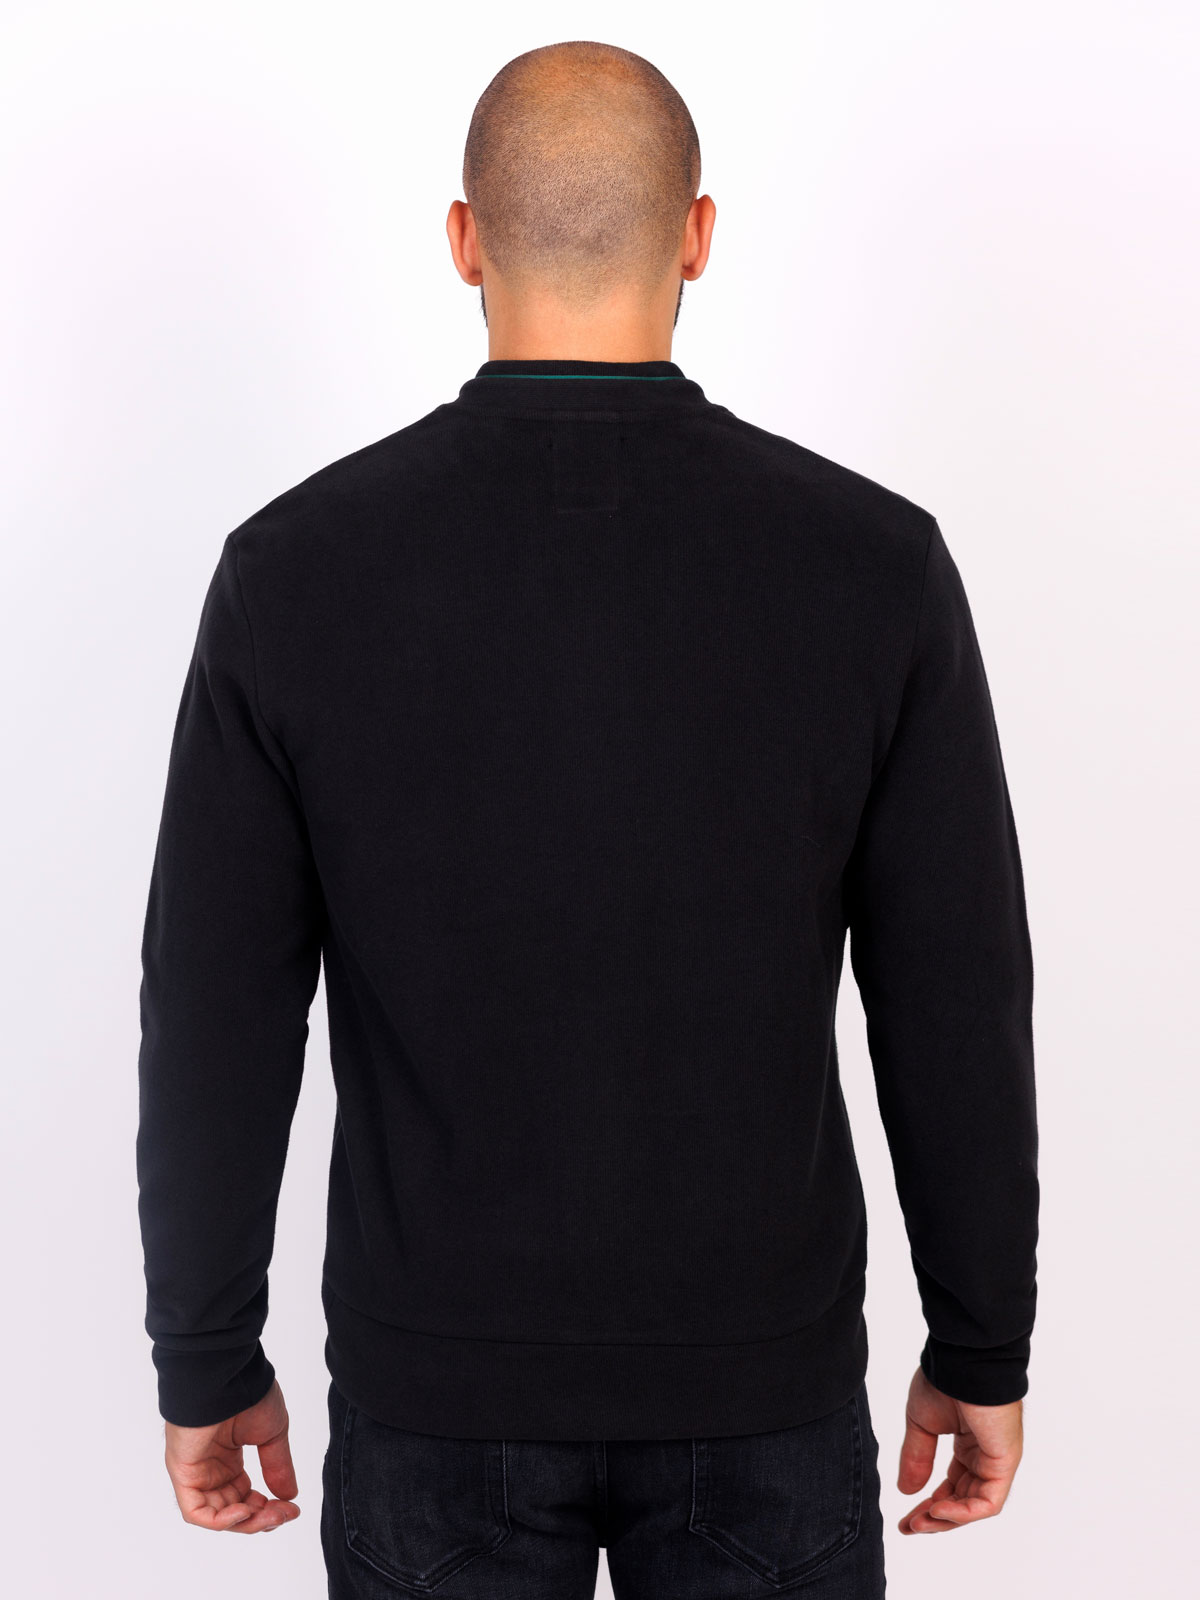 Sports sweatshirt with green accent - 28119 € 38.24 img2